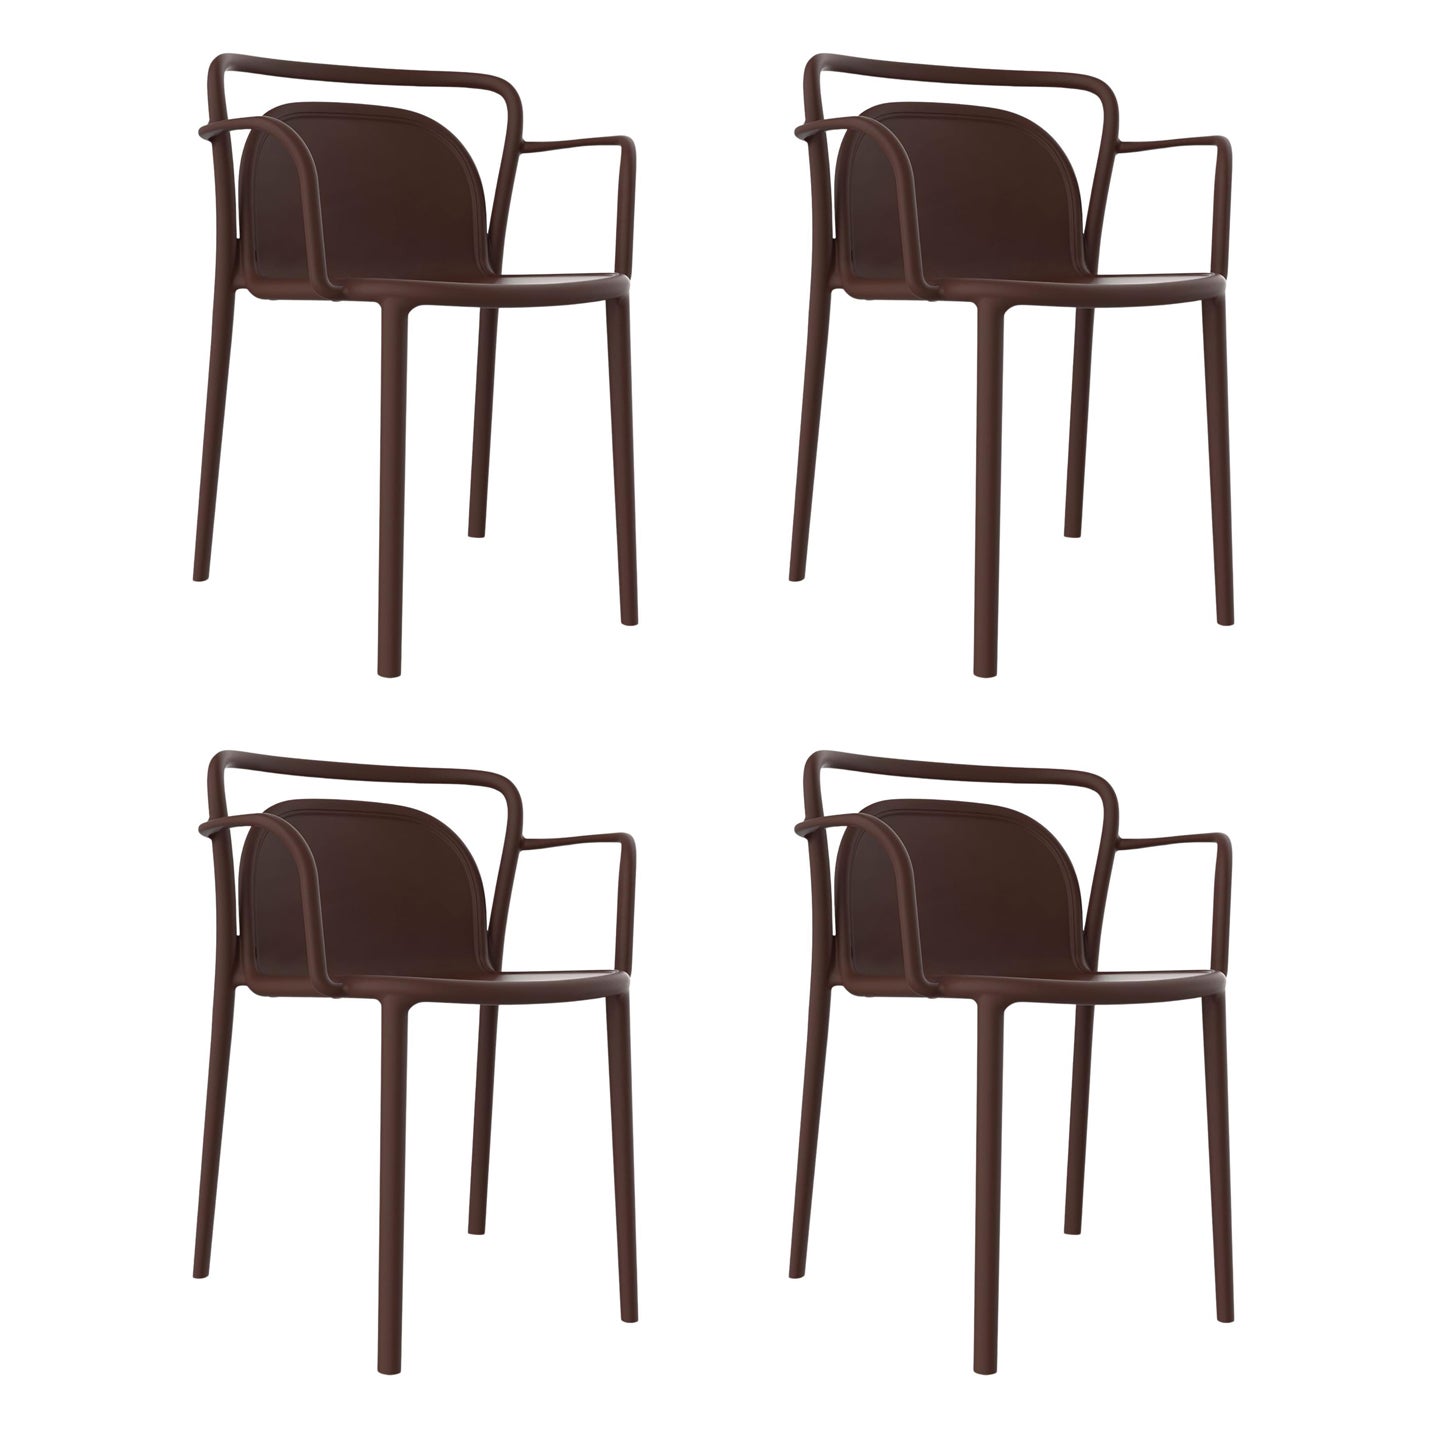 Set of 4 Classe Chocolate Chairs by Mowee For Sale